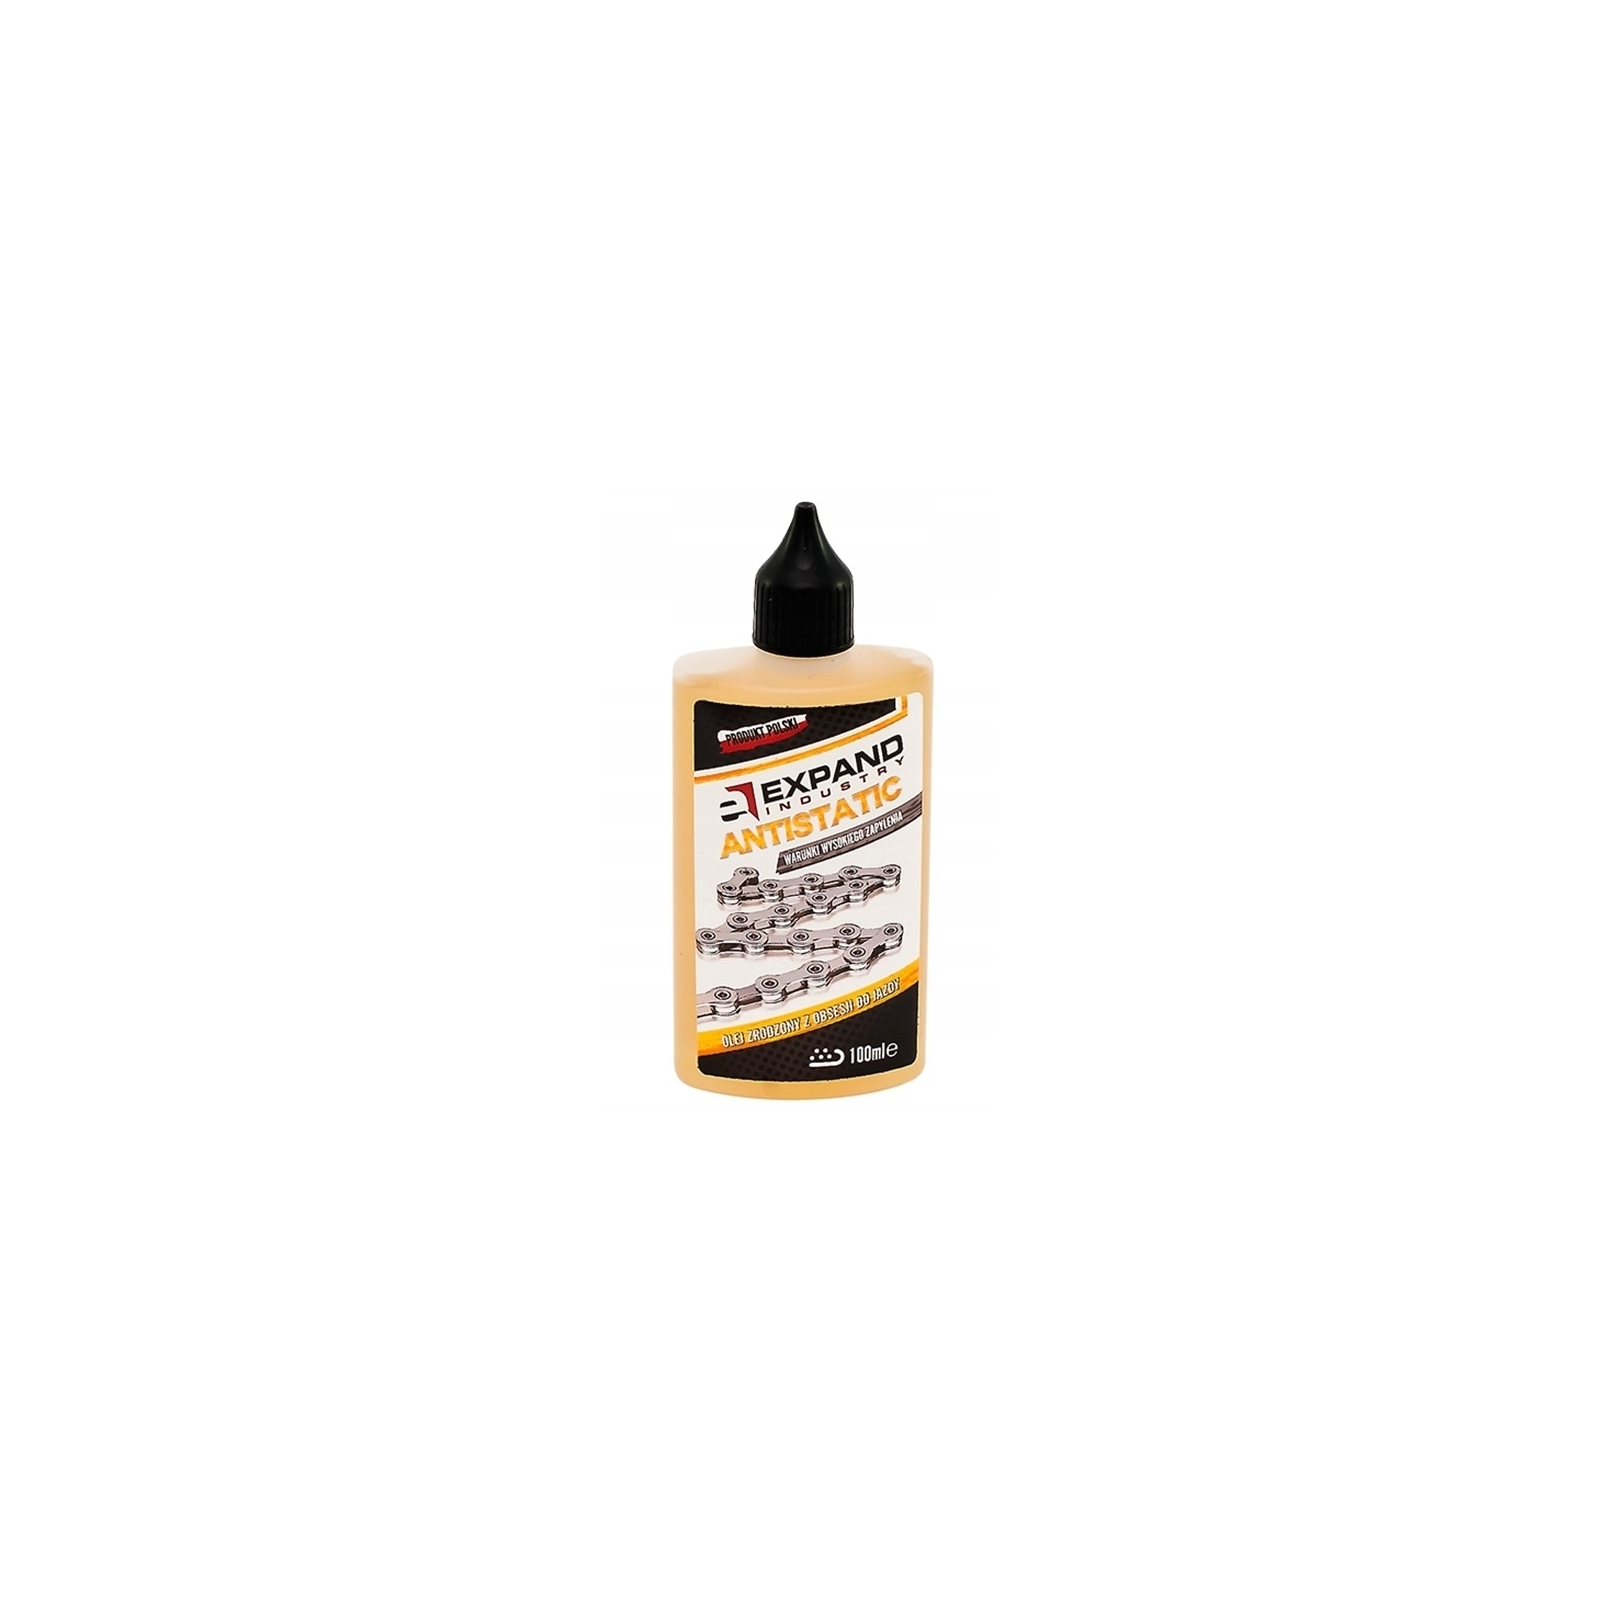 Масло велосипедное Expand Chain Antistatic oil extra dry 100ml (CLU-012)